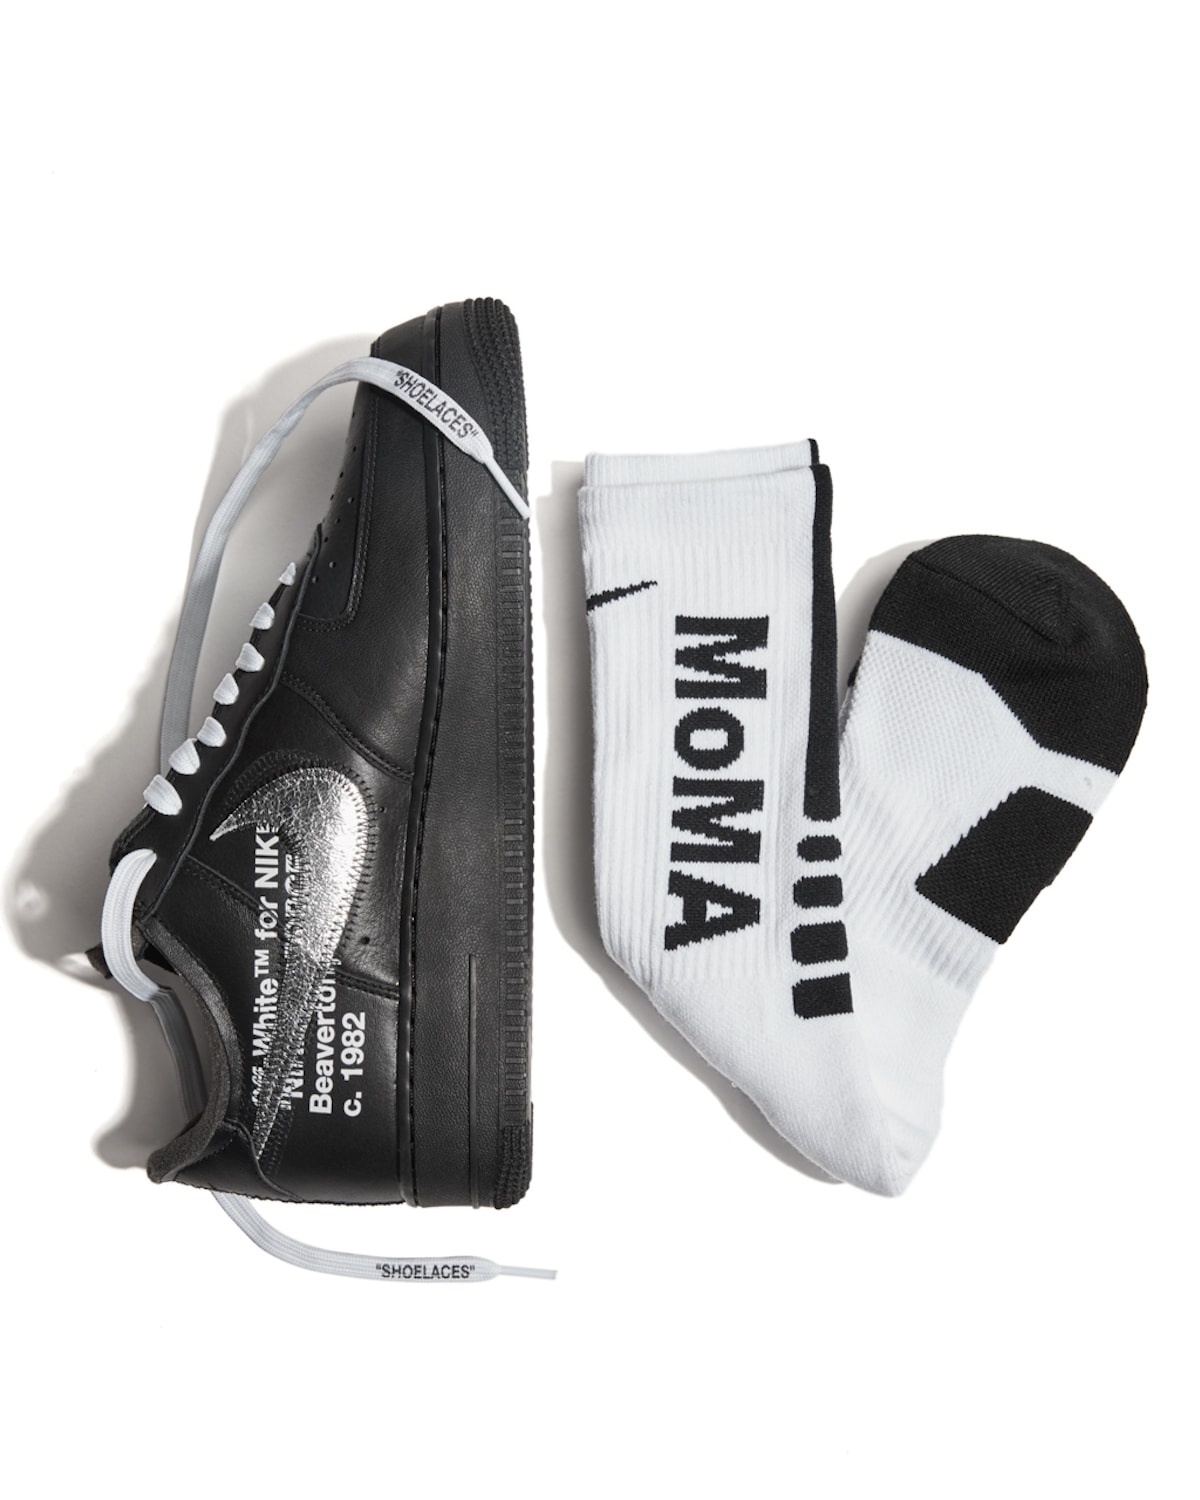 Virgil Abloh x Nike Air Force 1 for MoMA 聯名鞋款正式發佈